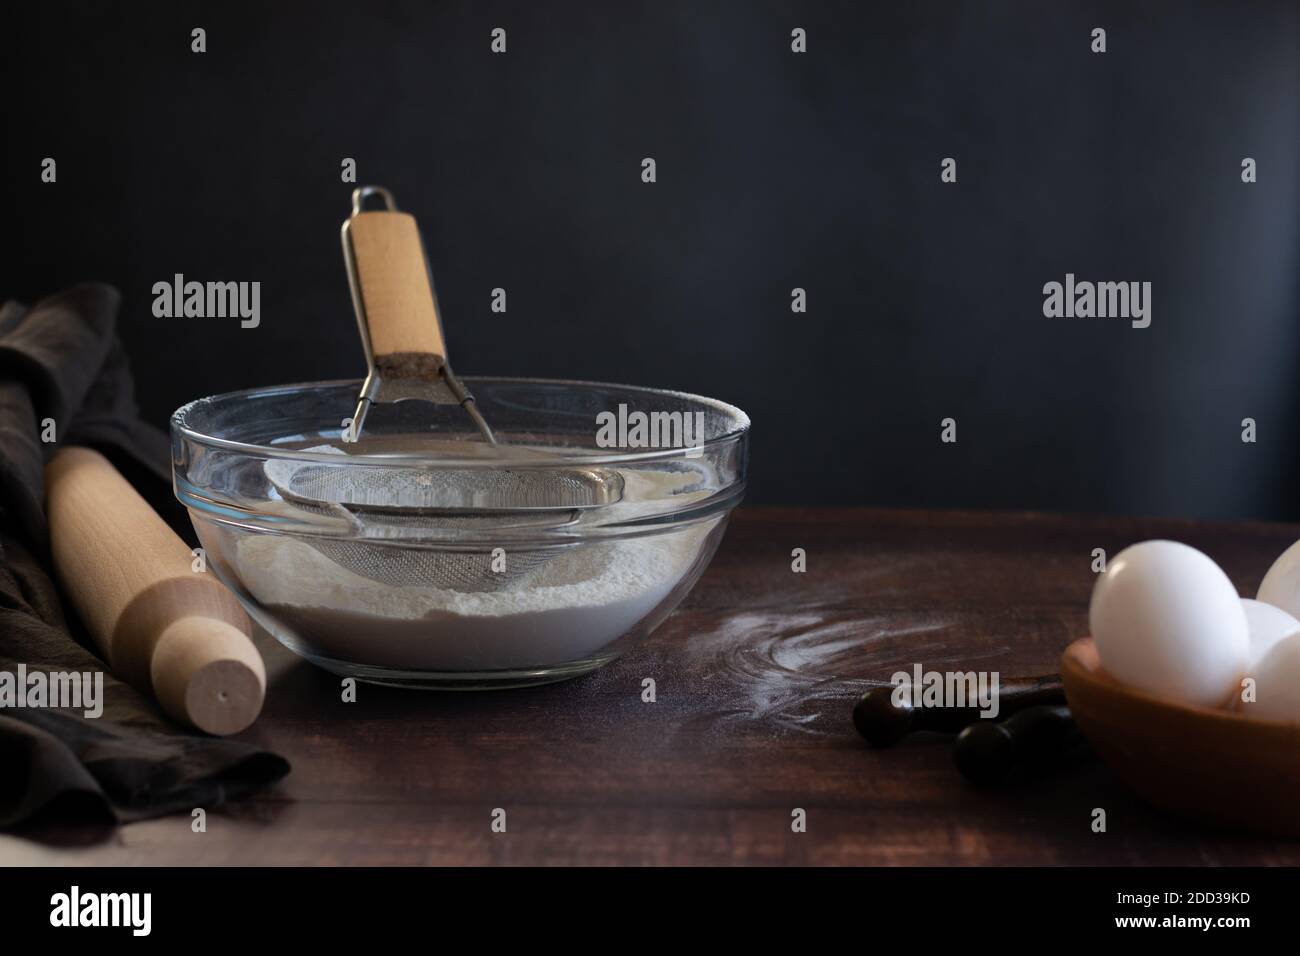 Bakery items - flour and eggs on dark background, healthy basic baking ingredients. Space for text Stock Photo